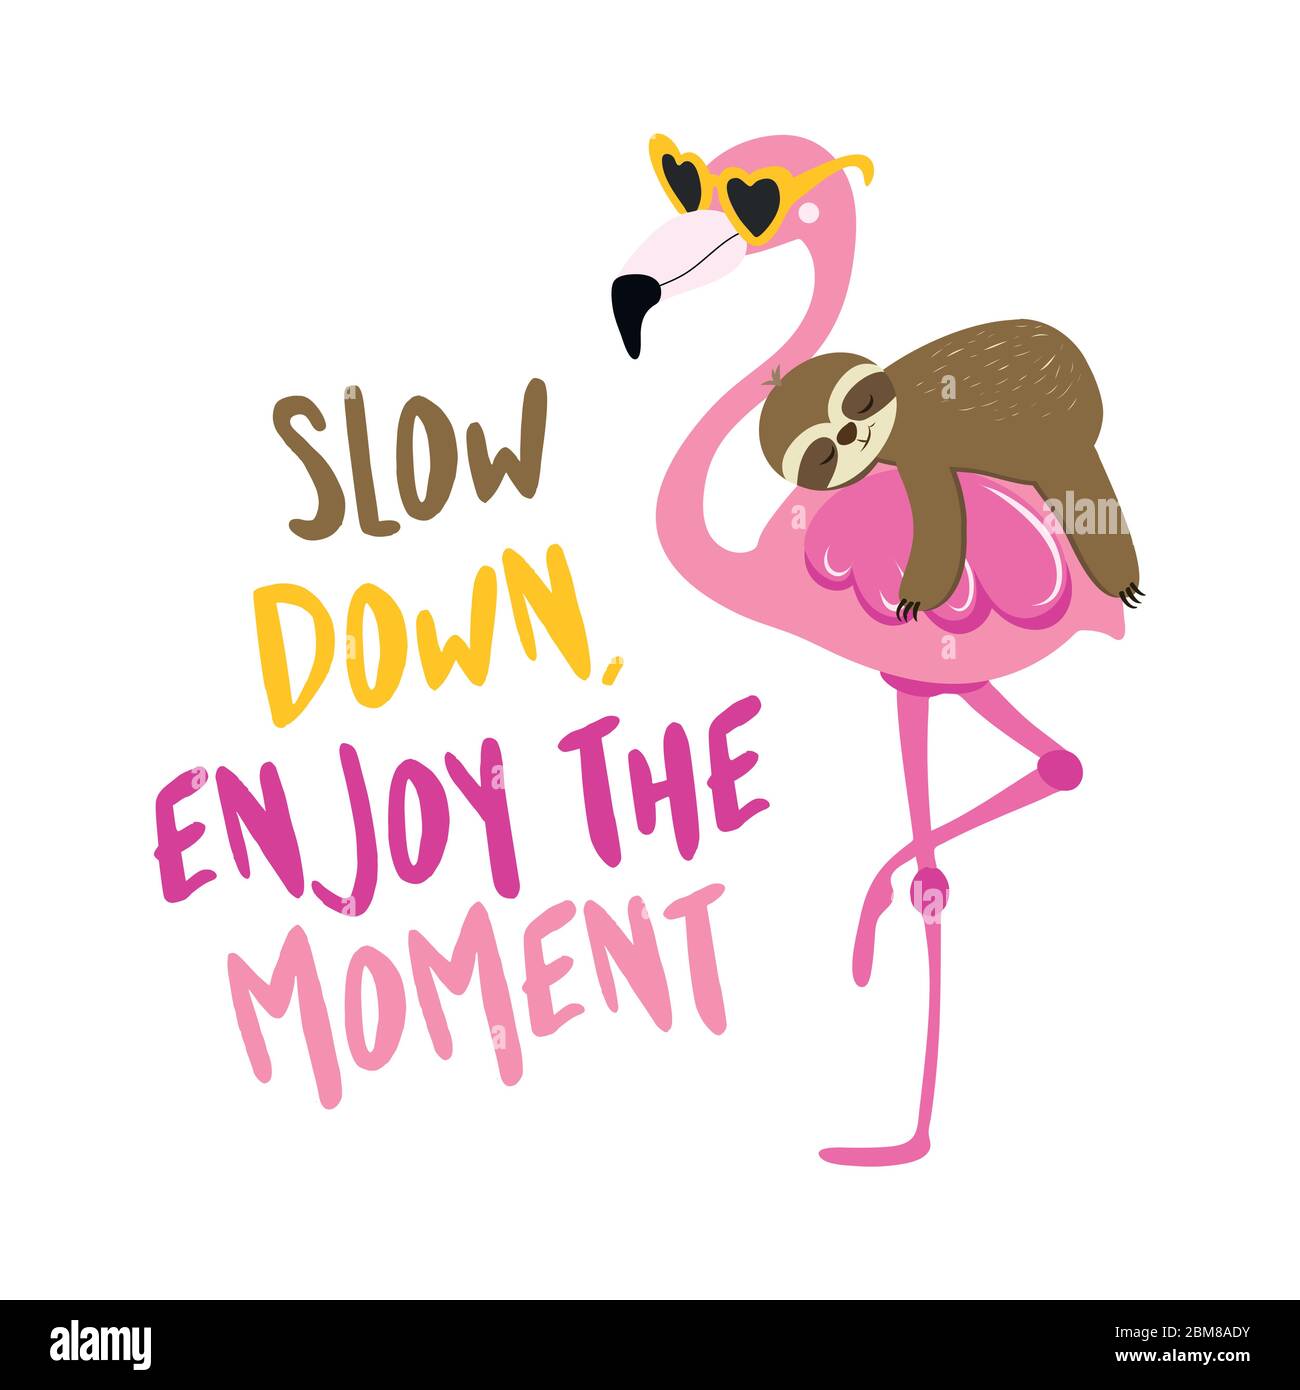 Slow down, enjoy the moment - cute sloth riding on flamingo. Relax and